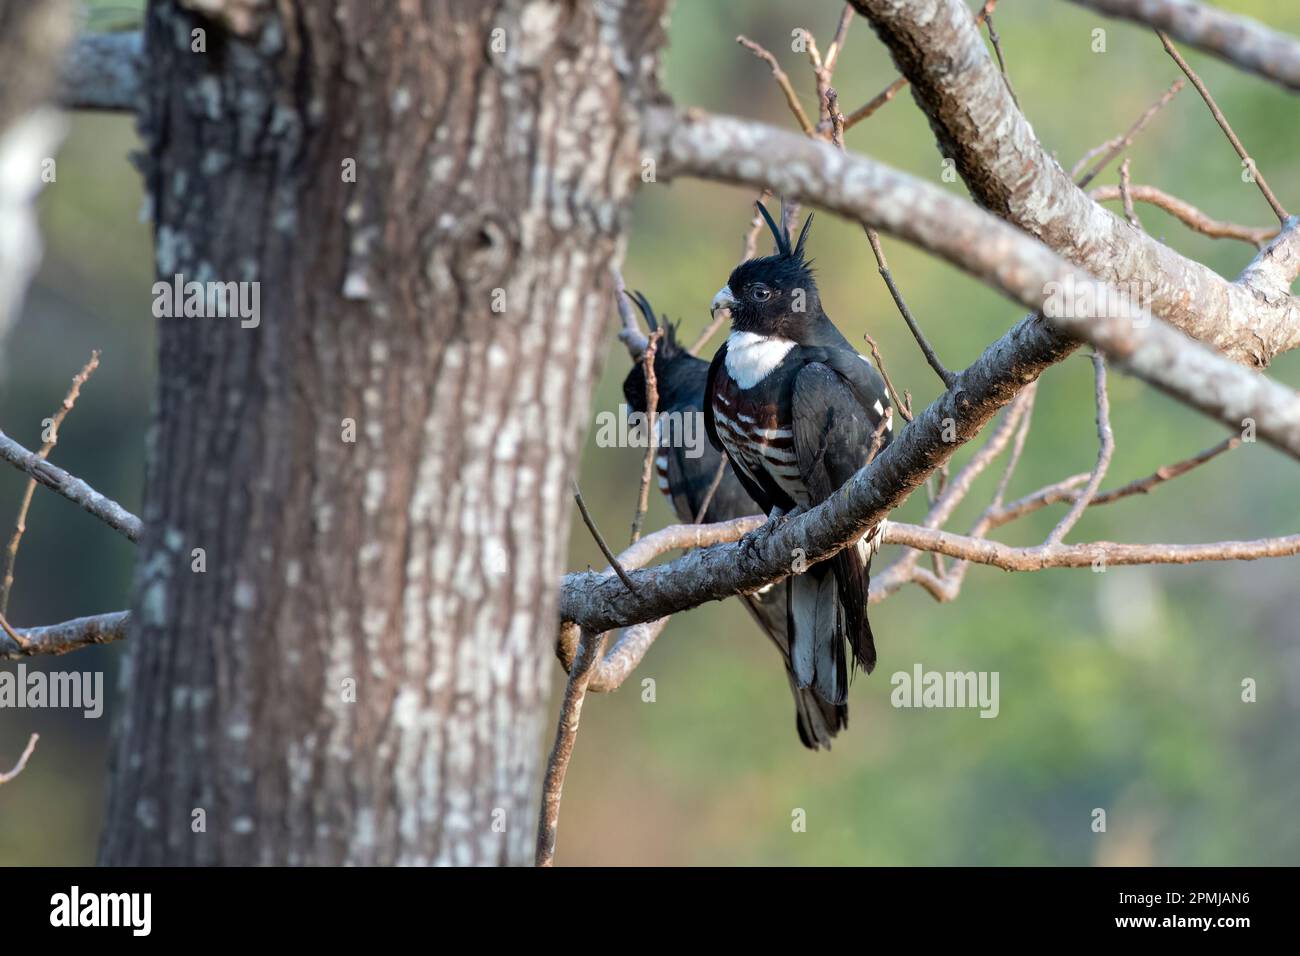 Black baza (Aviceda leuphotes), a small bird of prey, observed in Rongtong in West Bengal, India Stock Photo